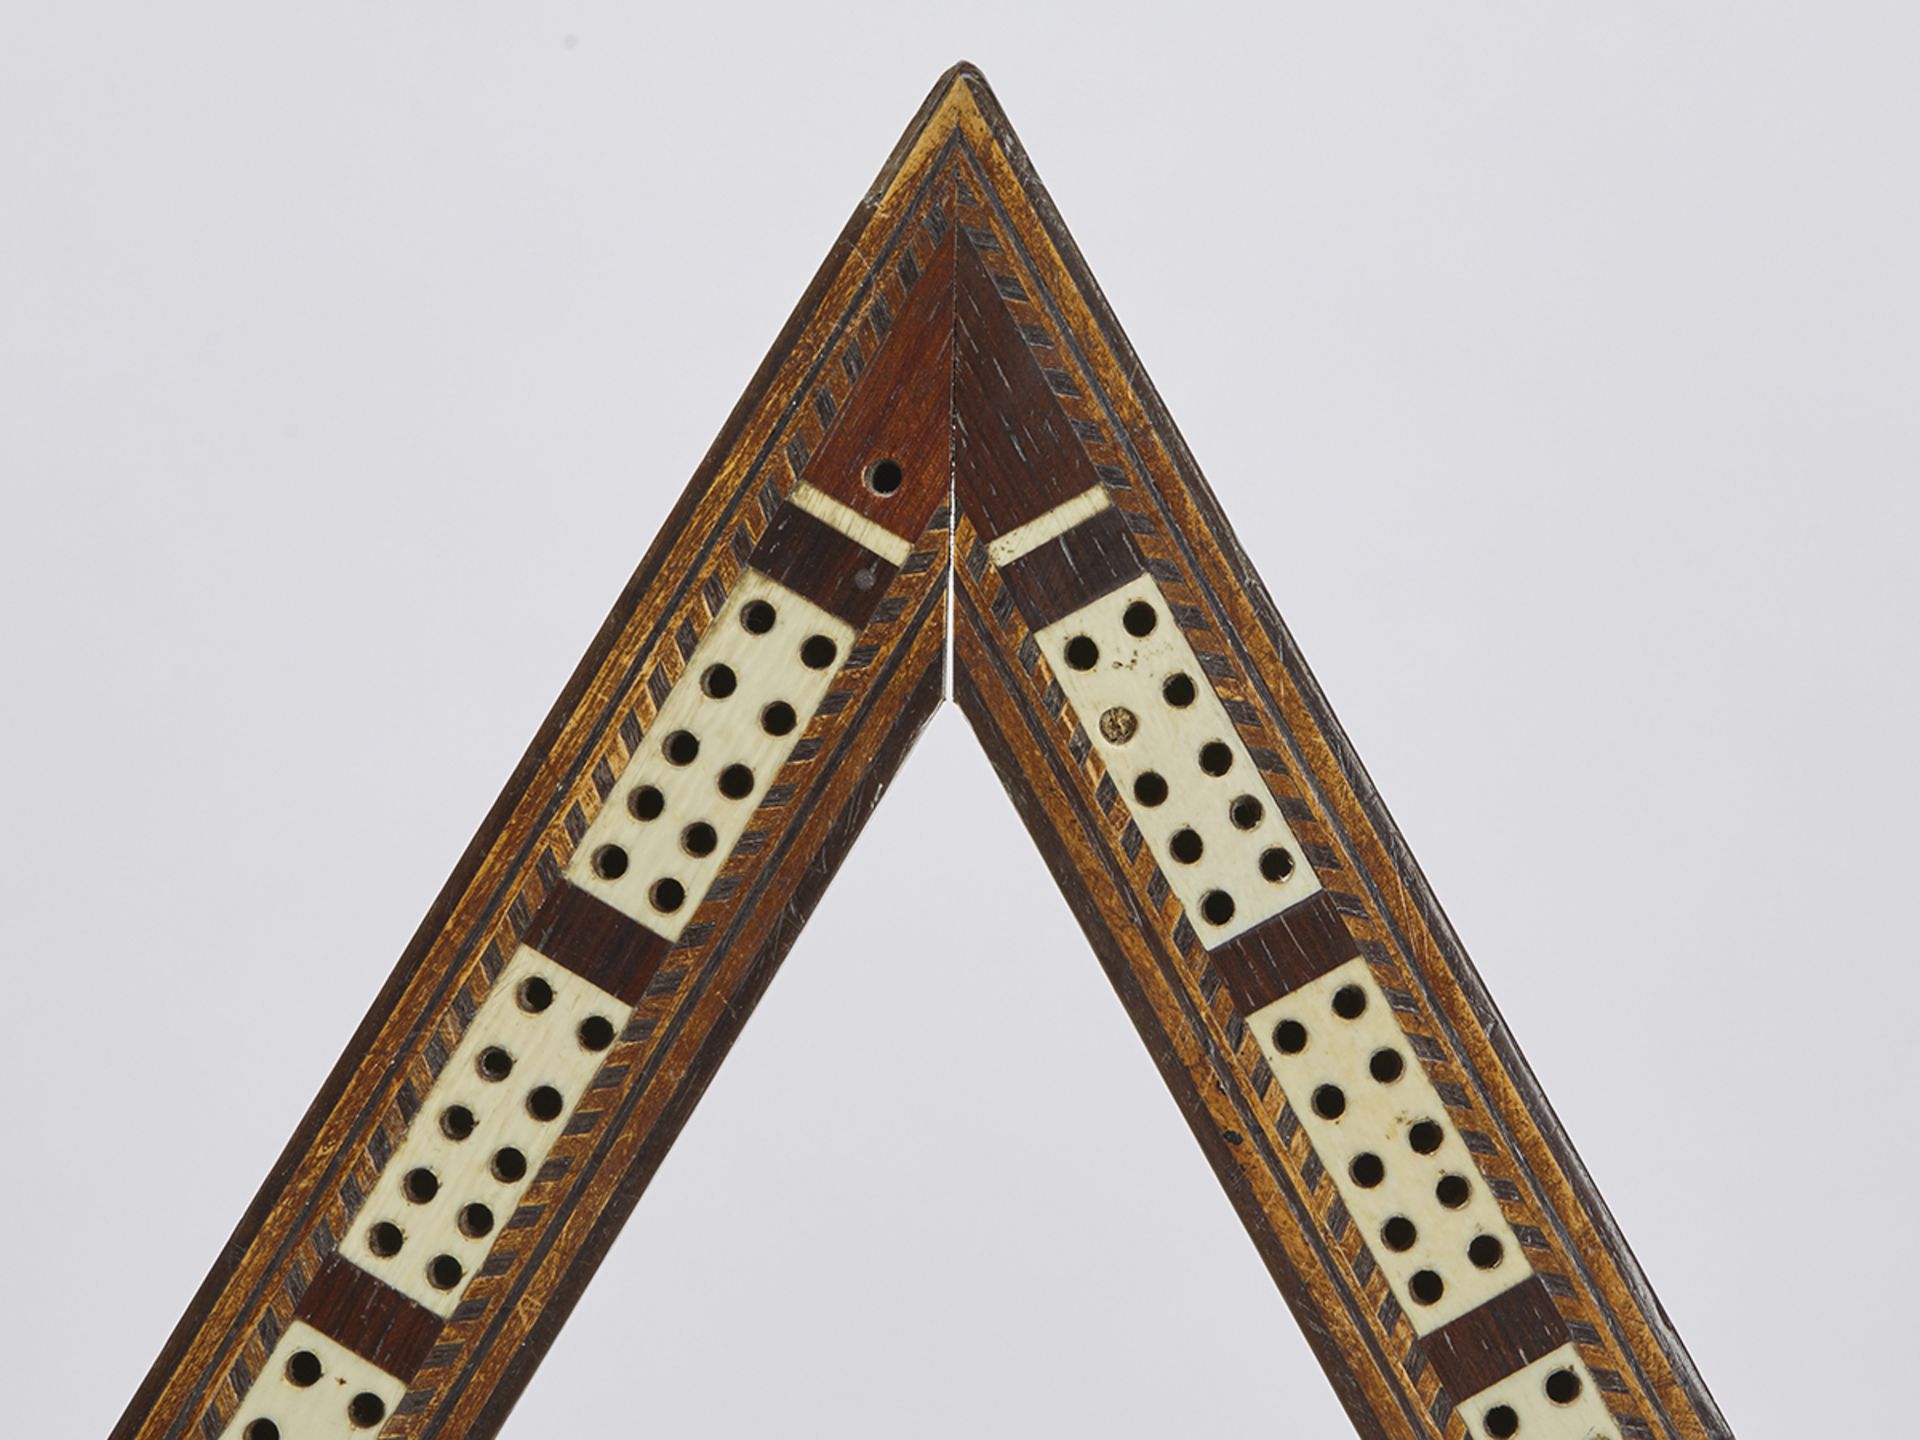 ANTIQUE INLAID TRIANGULAR WOODEN CRIBBAGE BOARD 19TH C. - Image 3 of 5